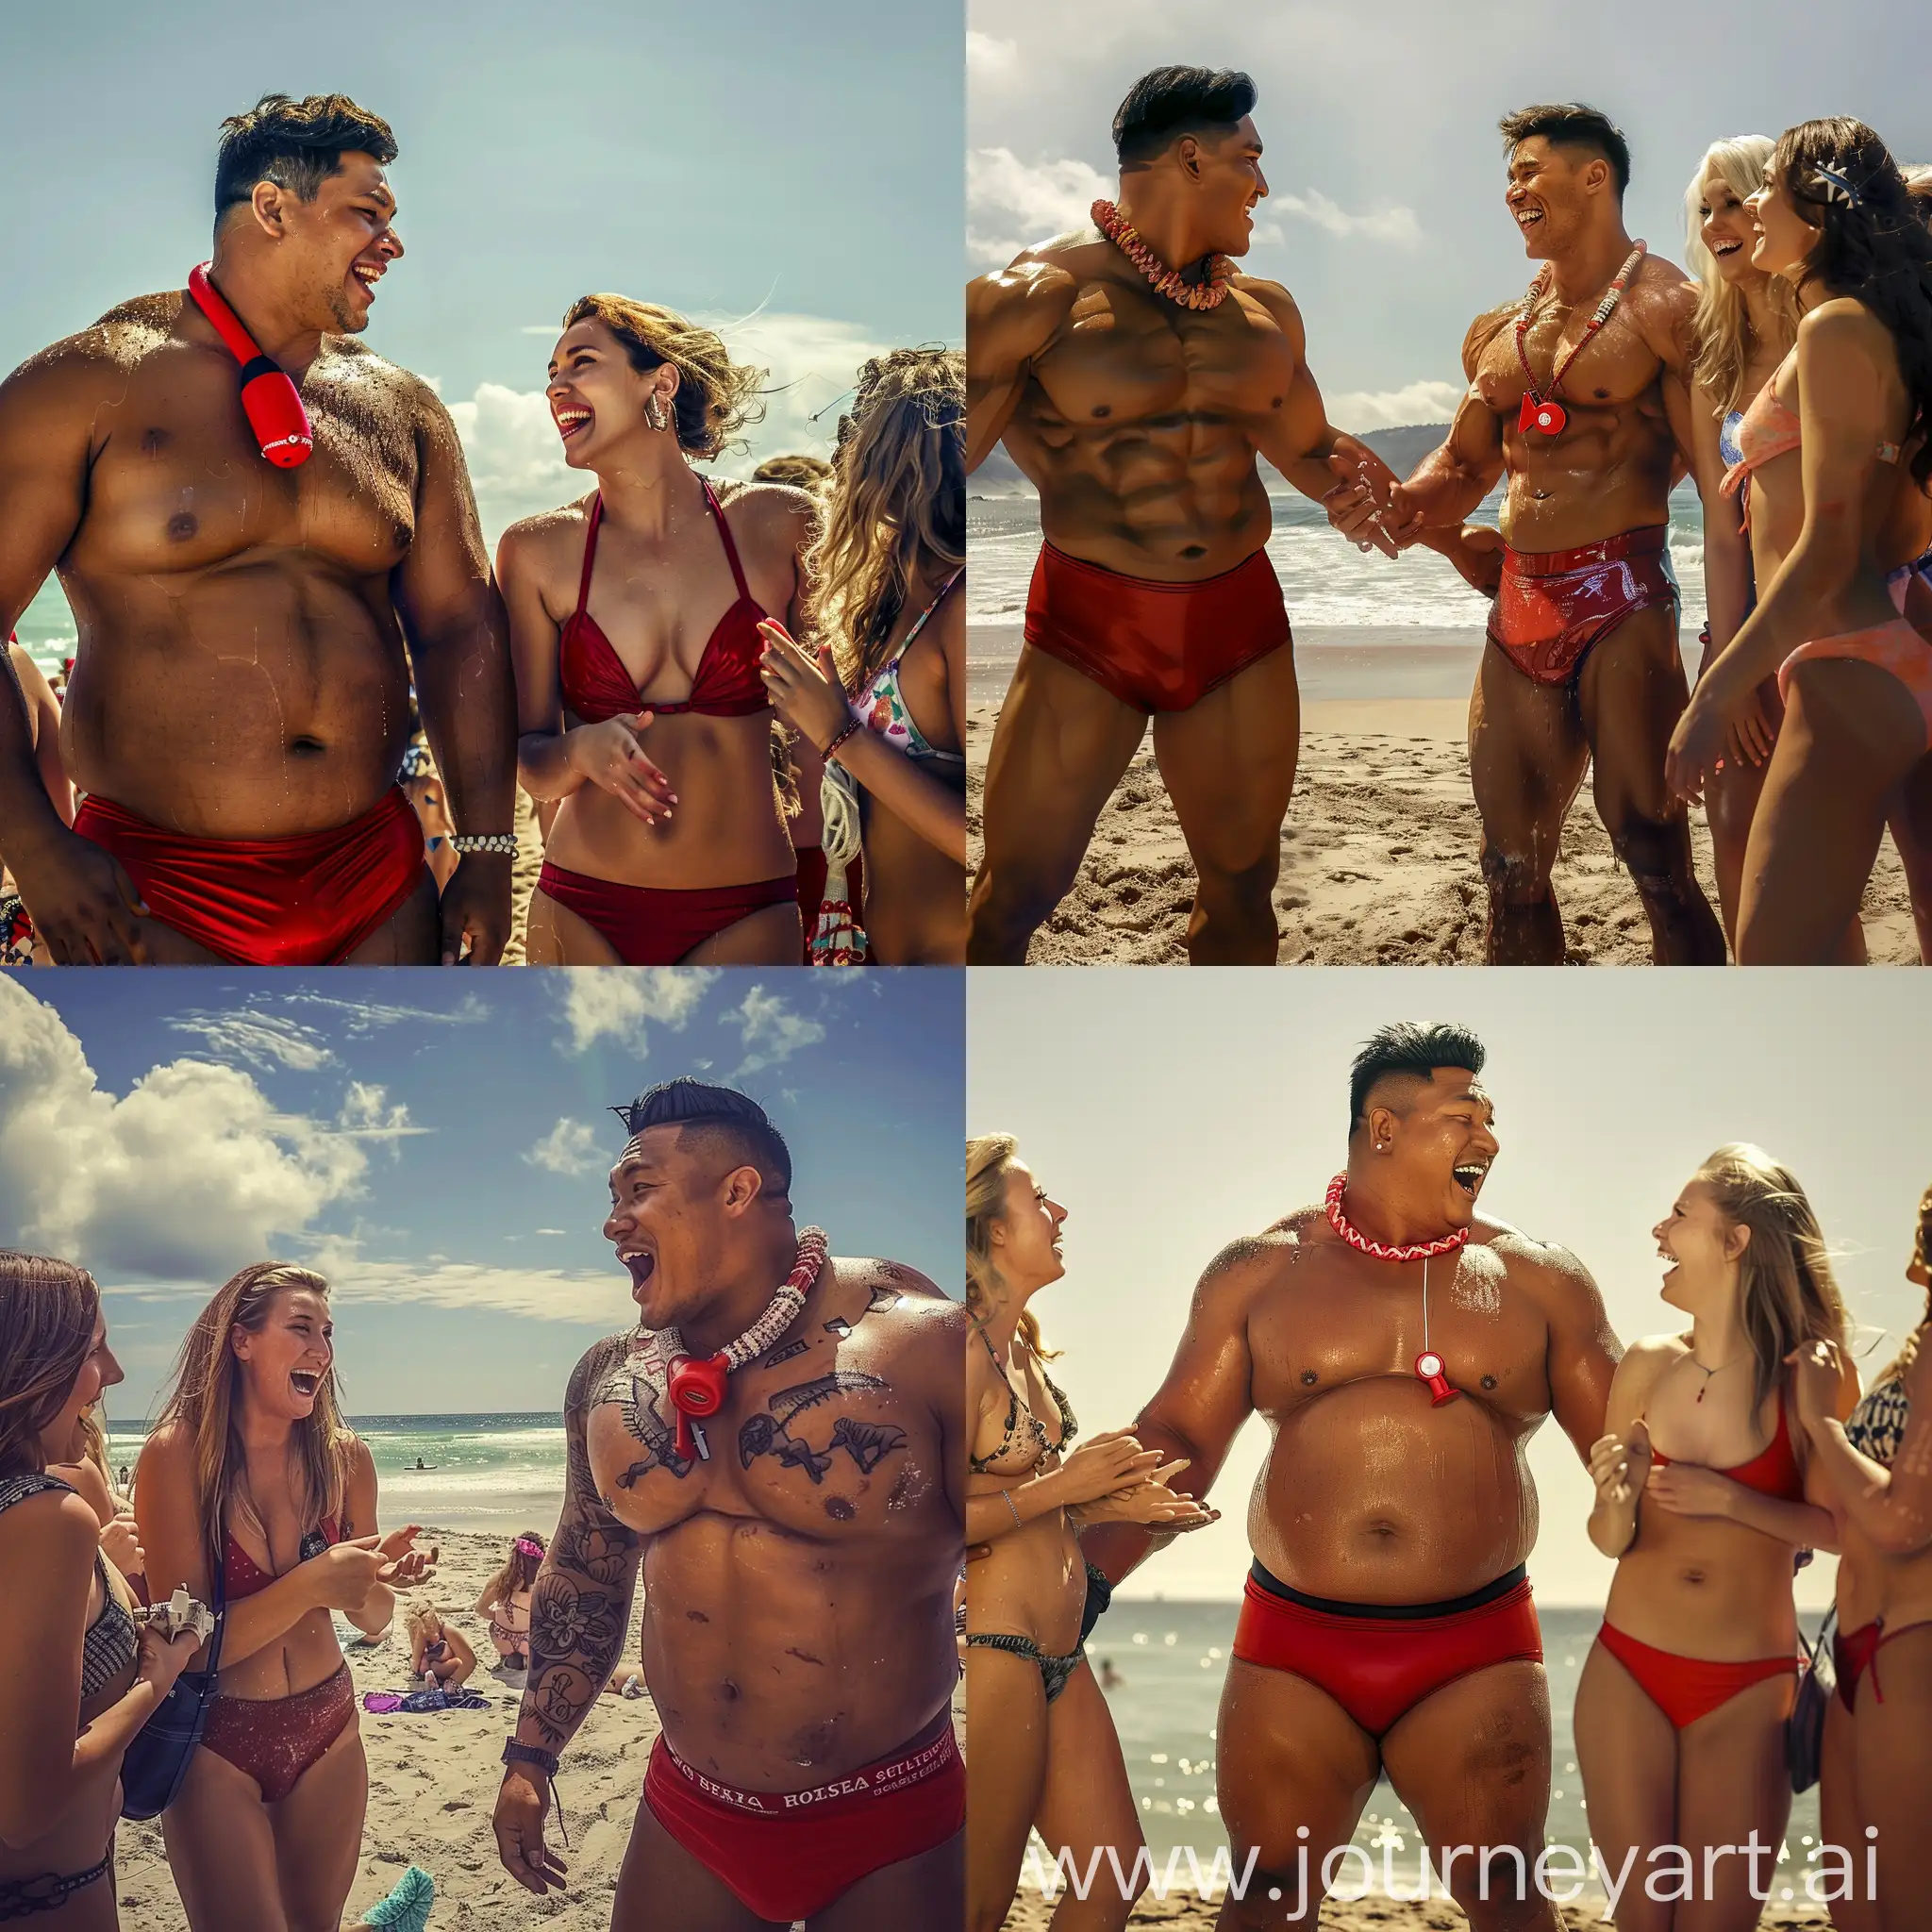 Hyper realistic, realistic full hd, ultre realistic, At the beach, beautiful sunny day, a huge tall and burly handsome latino life guard wearing red speedos, wearing a red whistle on his neck, good looking burly lifeguard, talking to beautiful women at the beach, all of them laughing happy